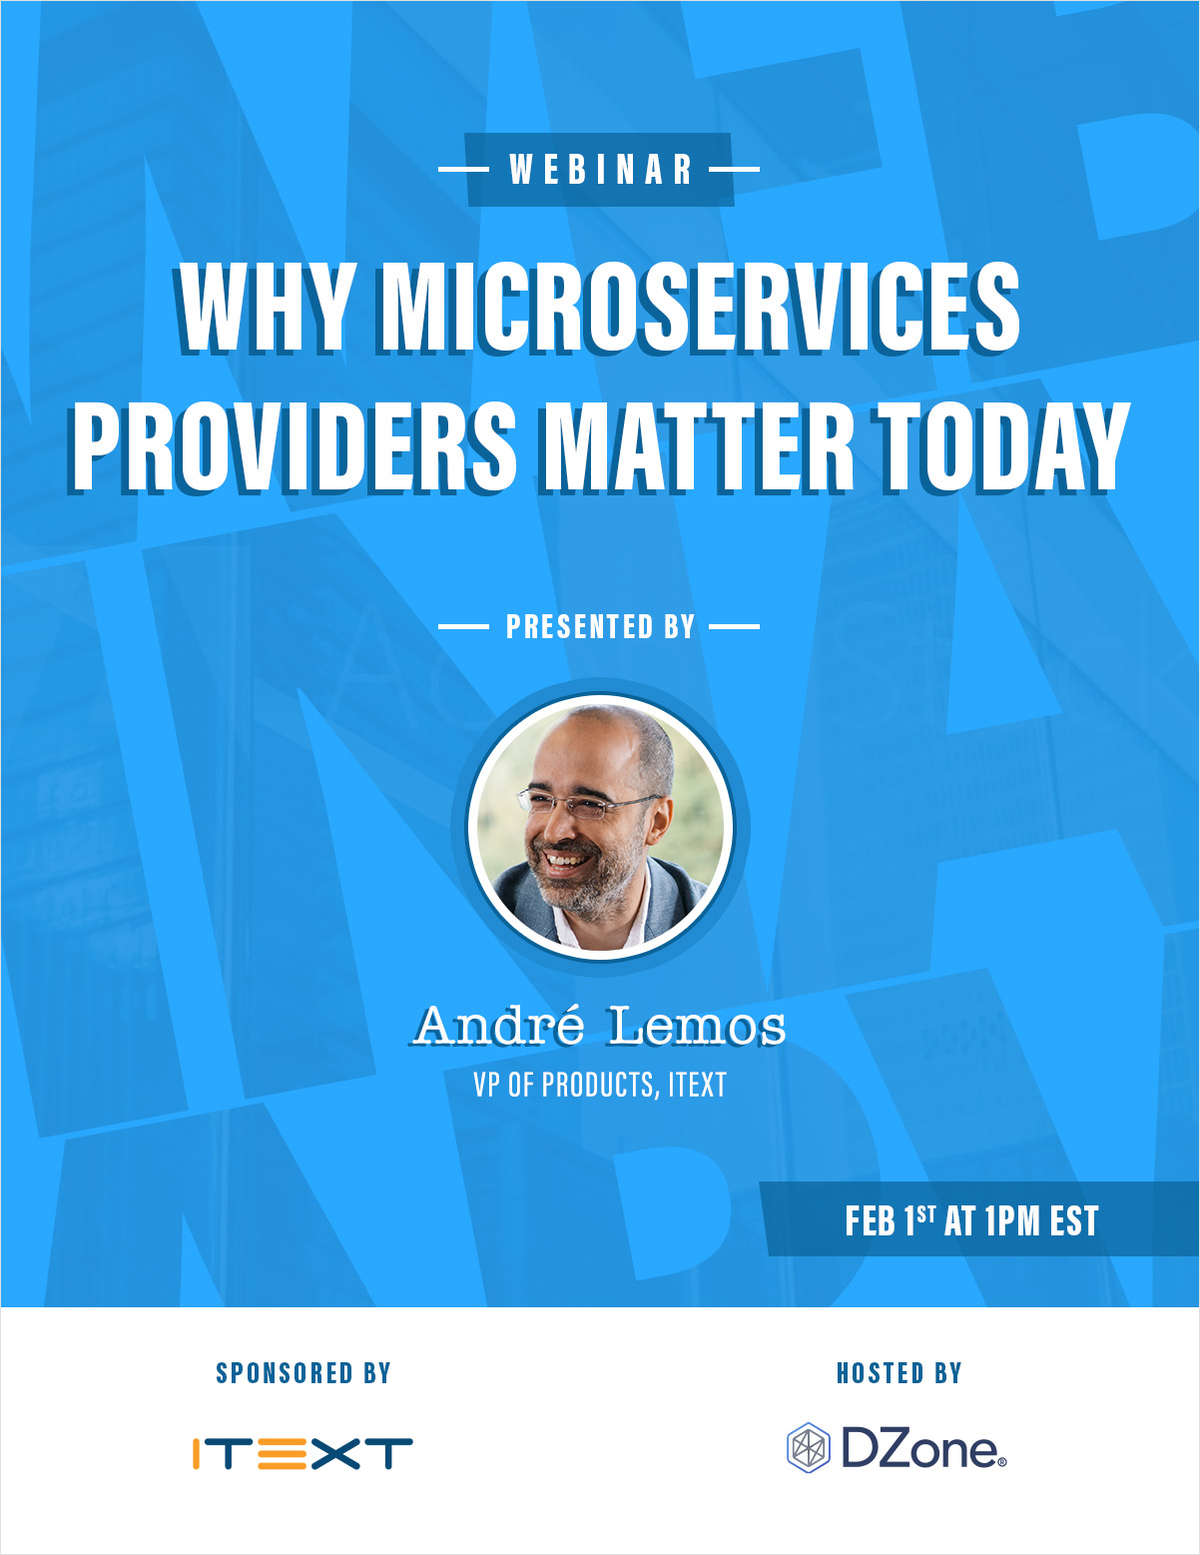 Why Microservices providers matter today